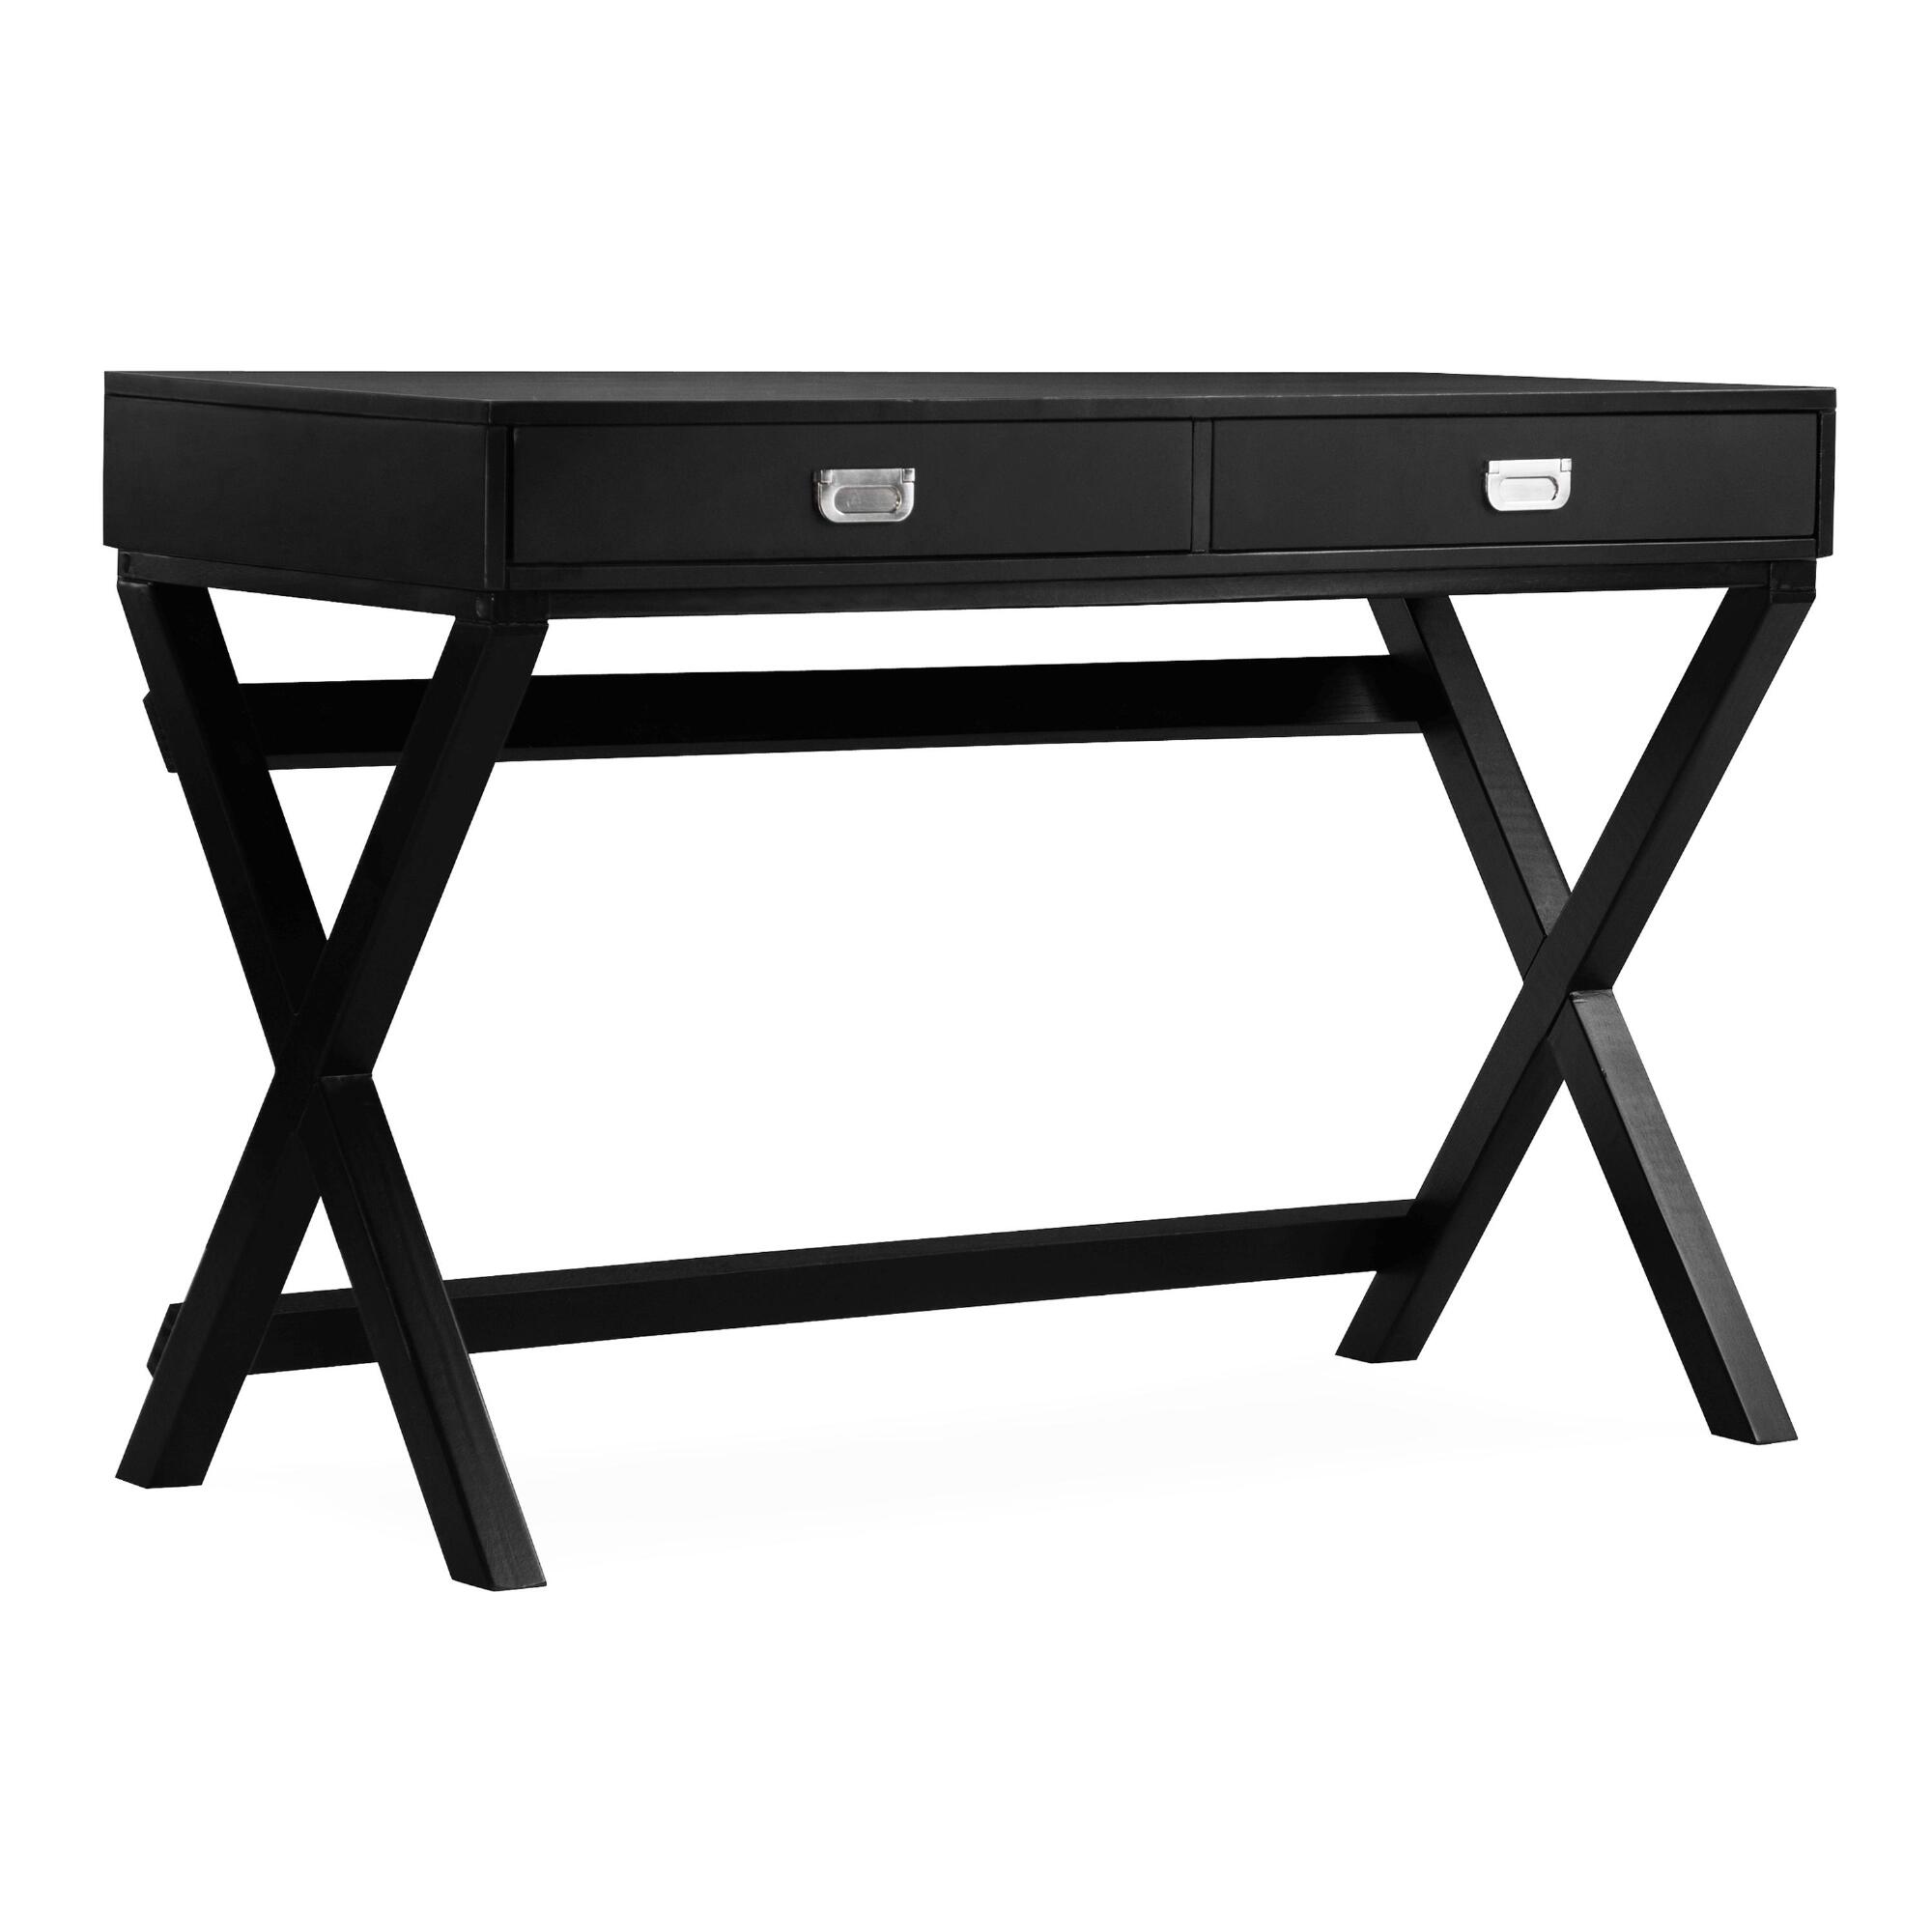 Wood Leah Campaign Desk with Drawers: Black by World Market